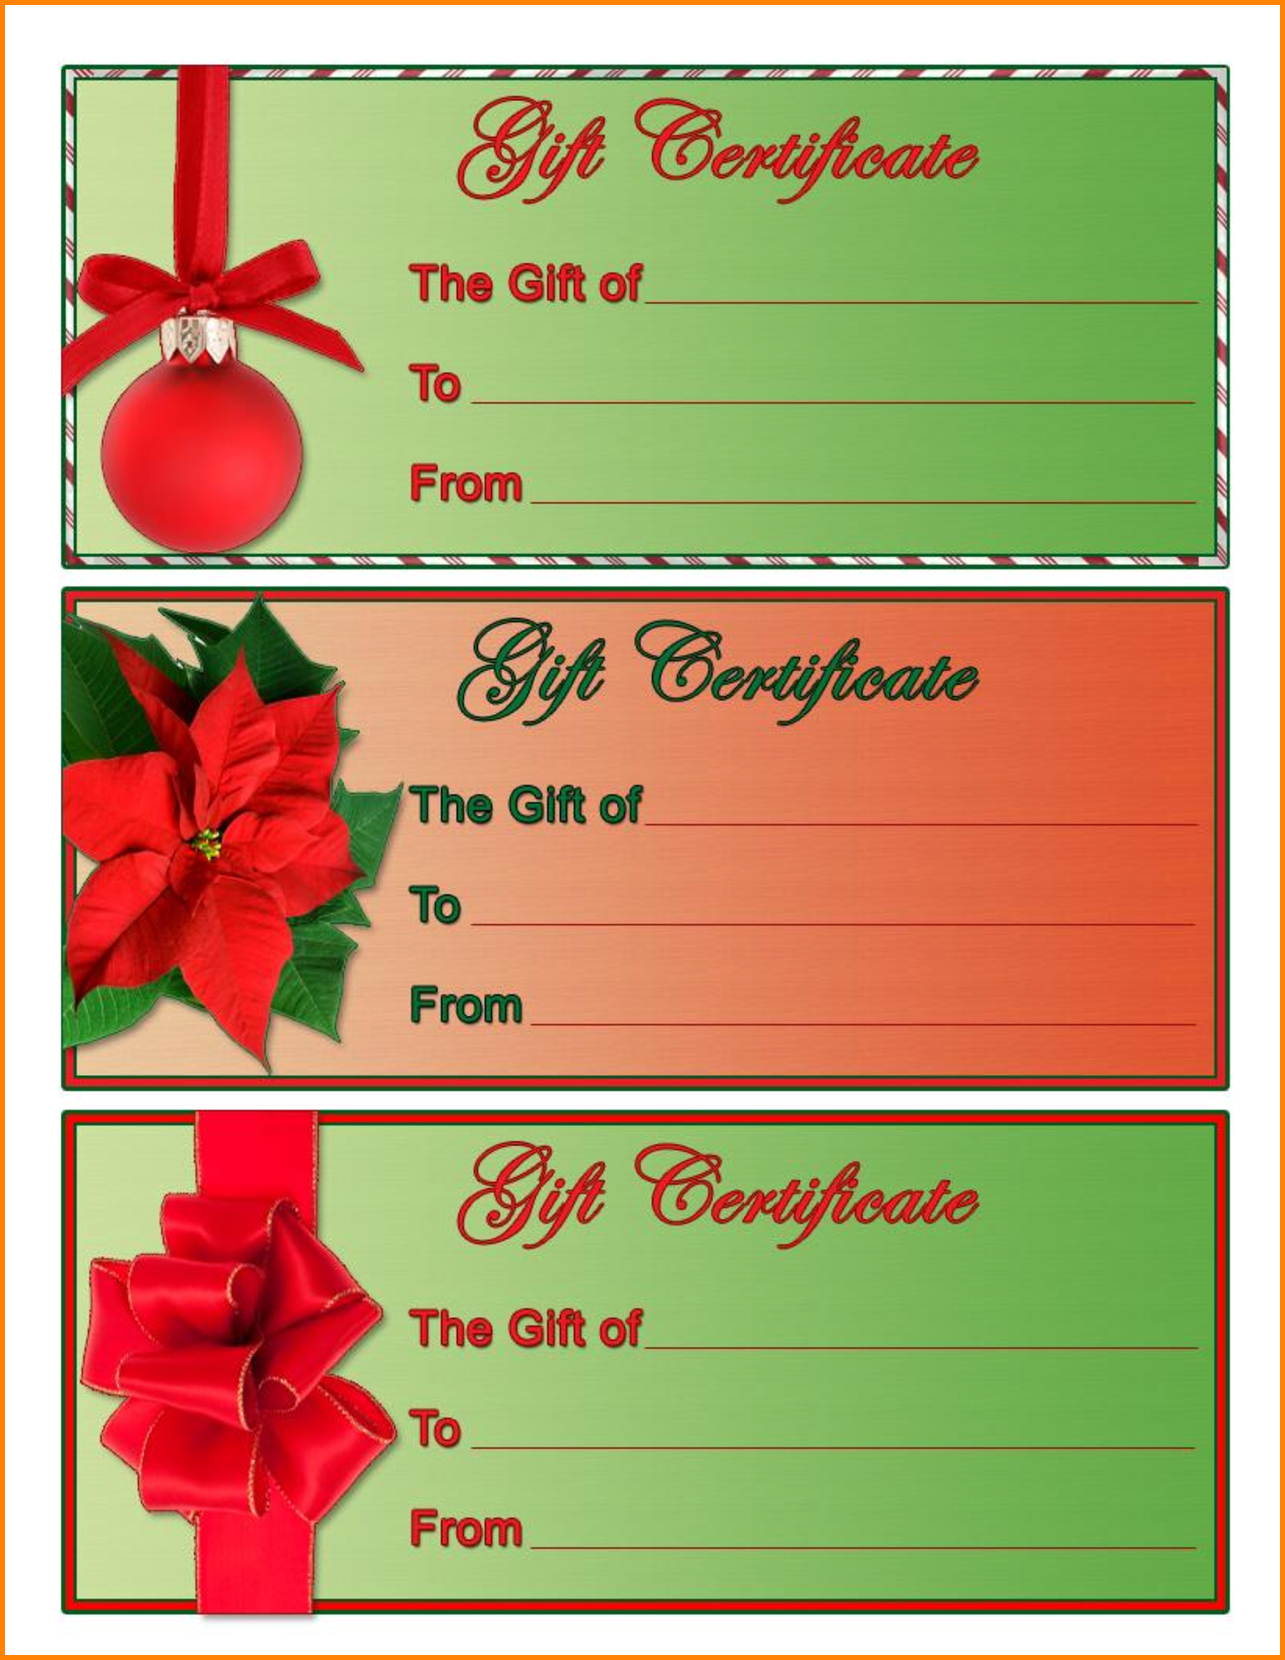 7+ Christmas Gift Certificate Template Free Download | Memo Within Free Christmas Gift Certificate Templates